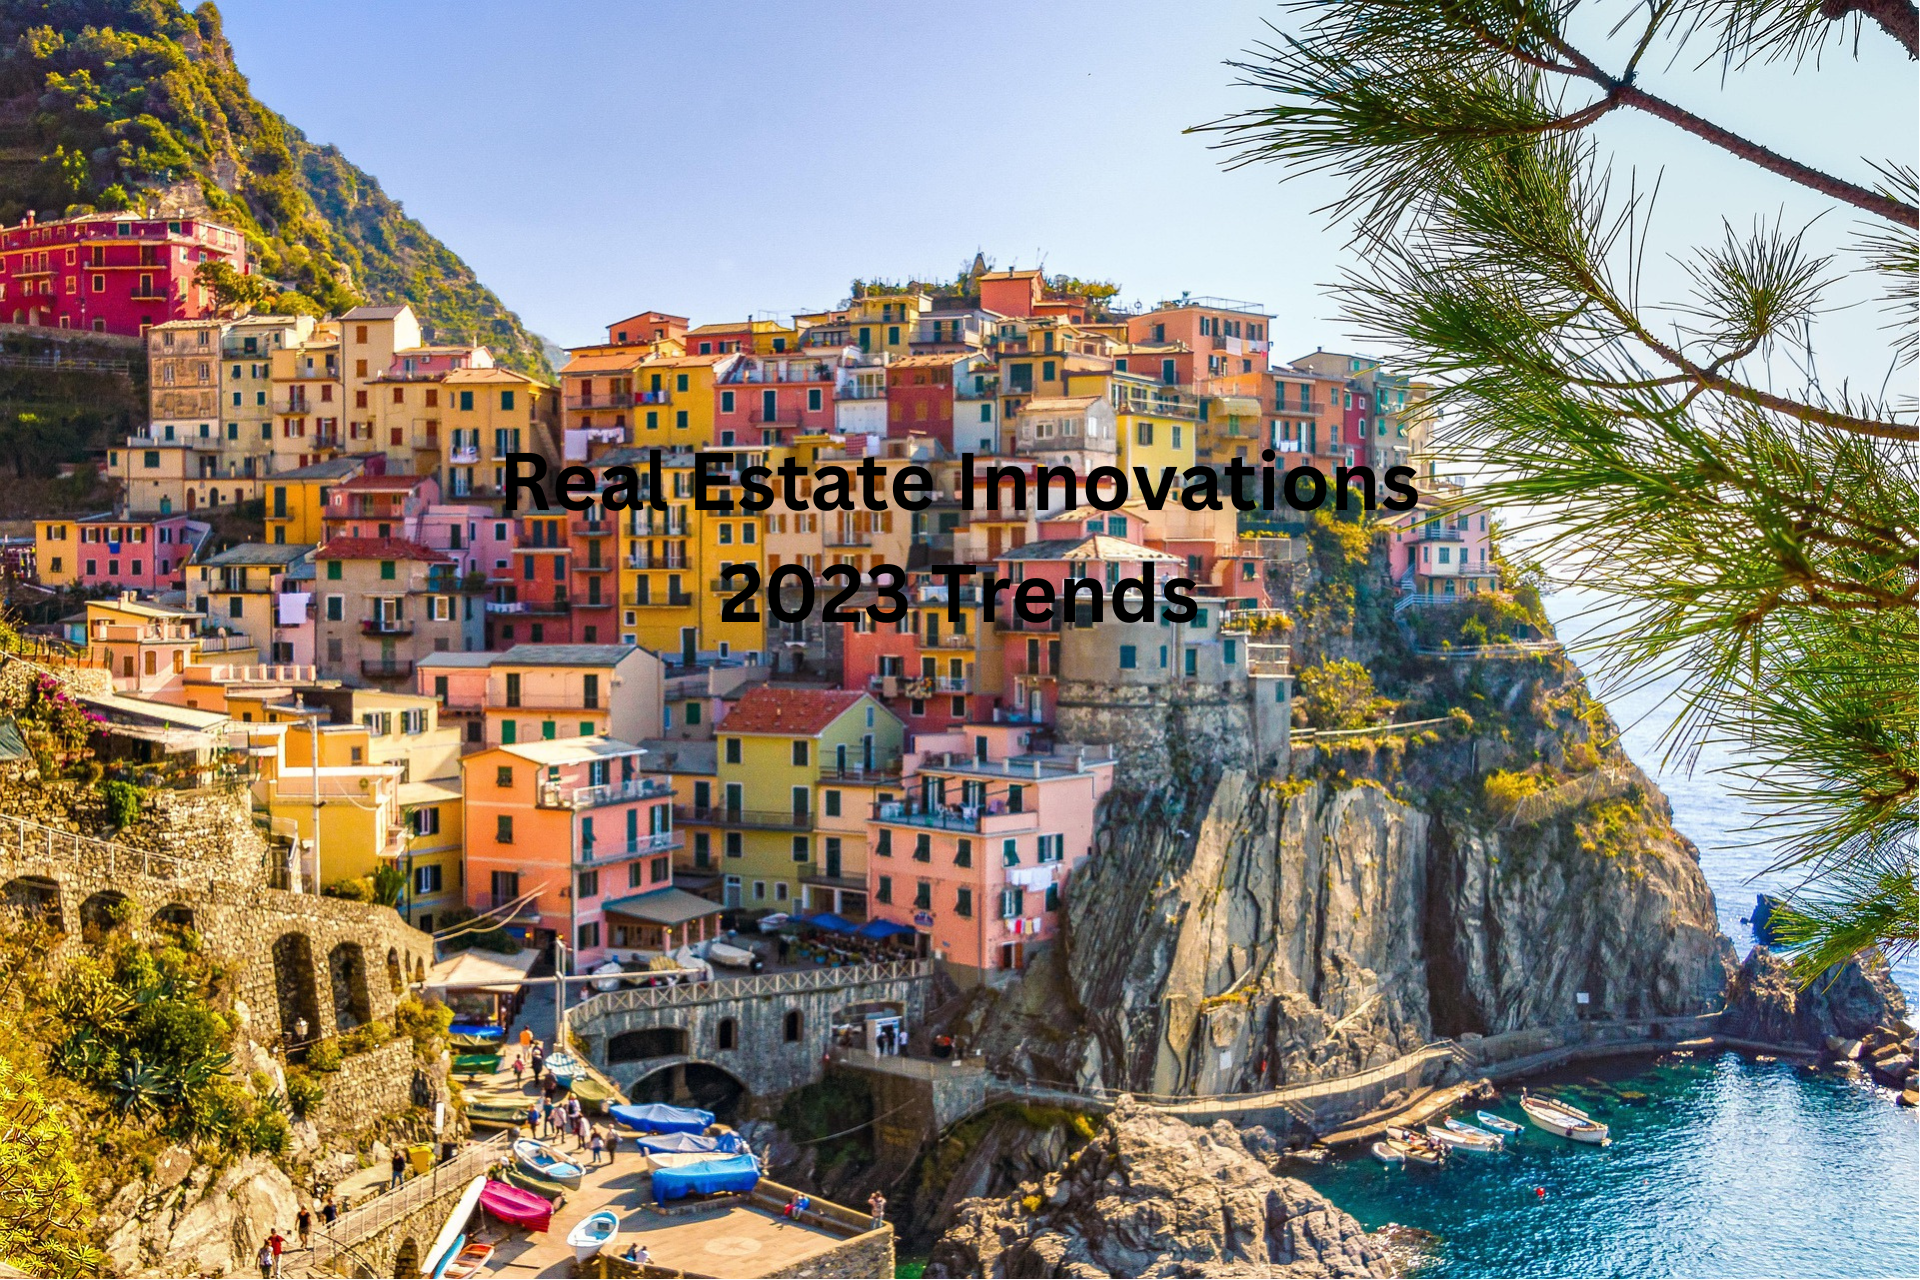 Real Estate Innovations 2023 Trends